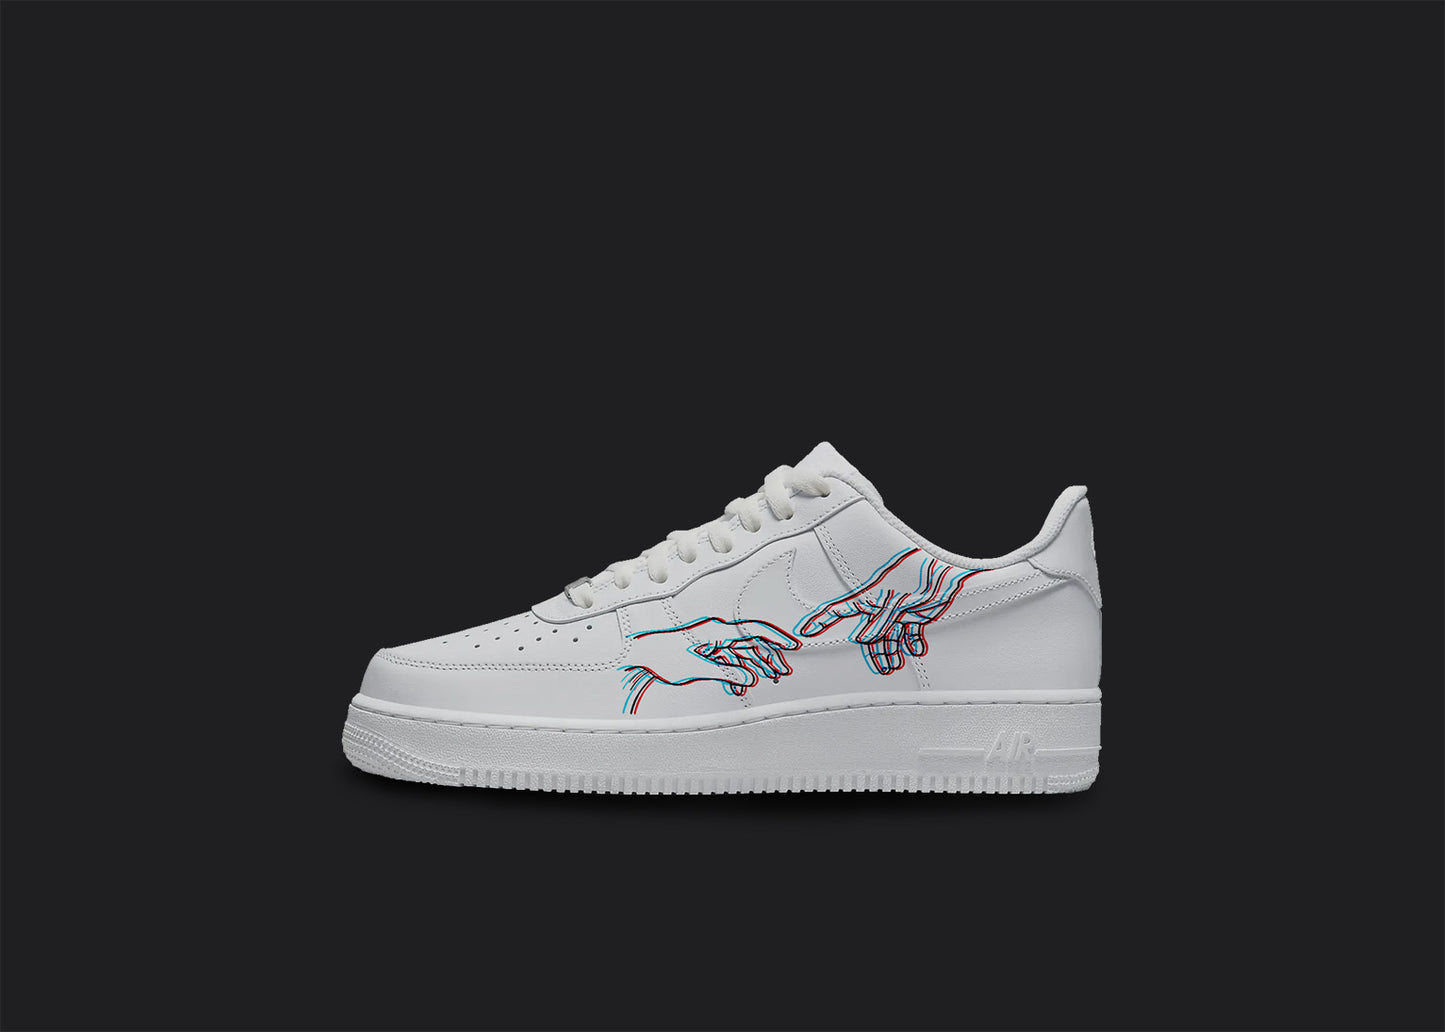 The image is of a Custom Nike Air force 1 sneaker on a blank black background. The white custom sneaker has a lineart creation of adams hands design on the outside of the sneaker.